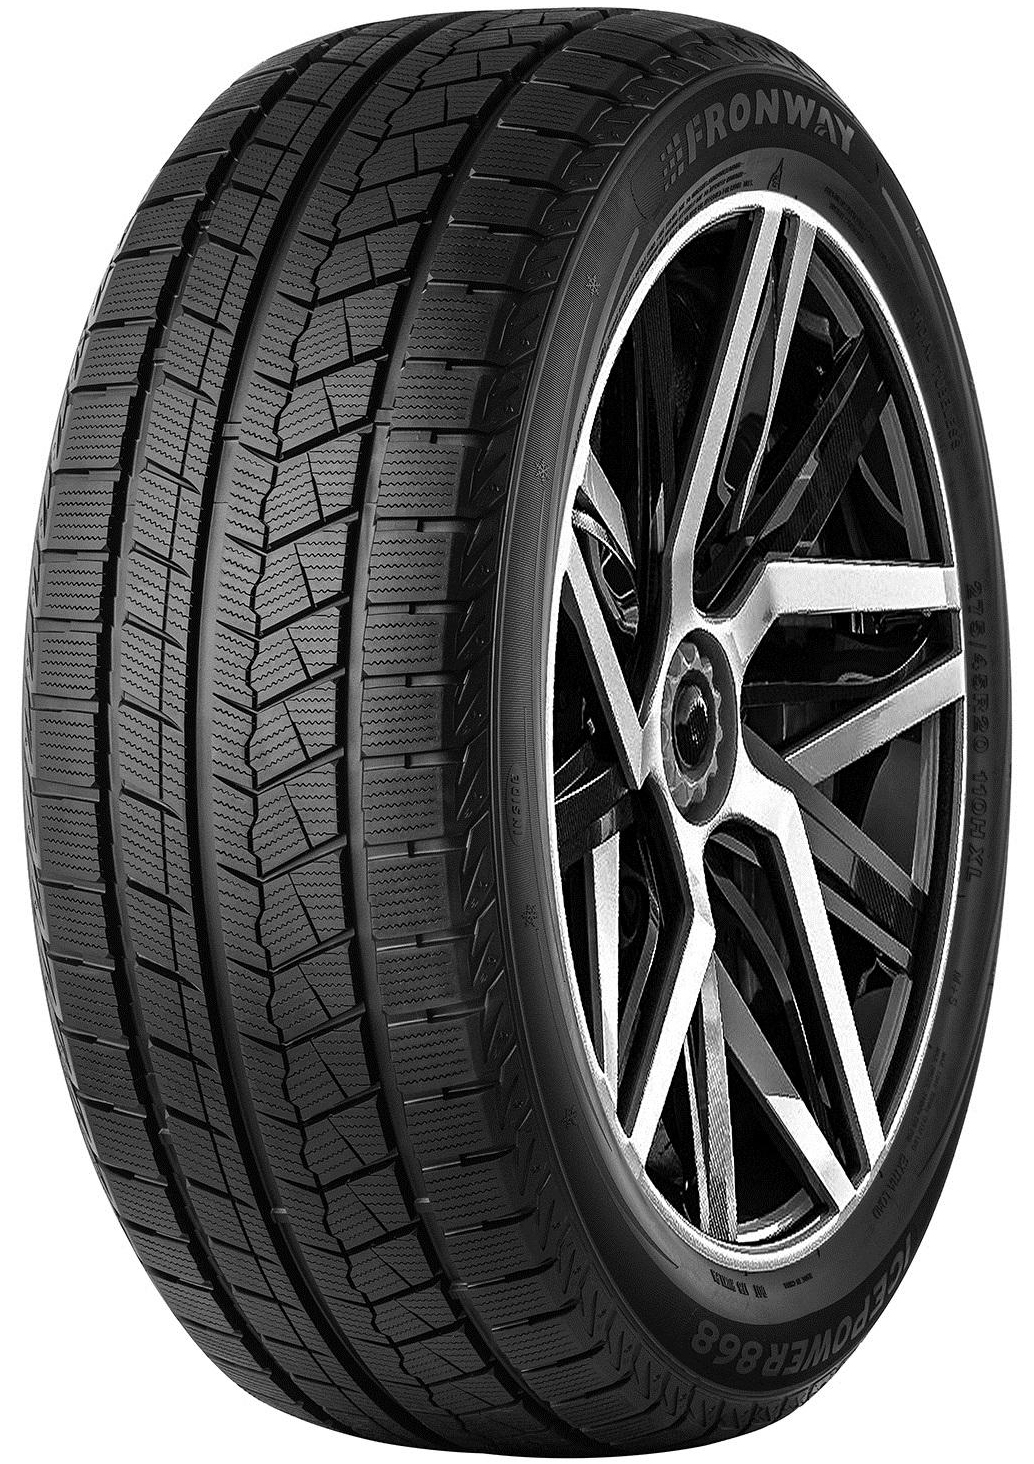    Fronway Icepower 868 255/55 R19 